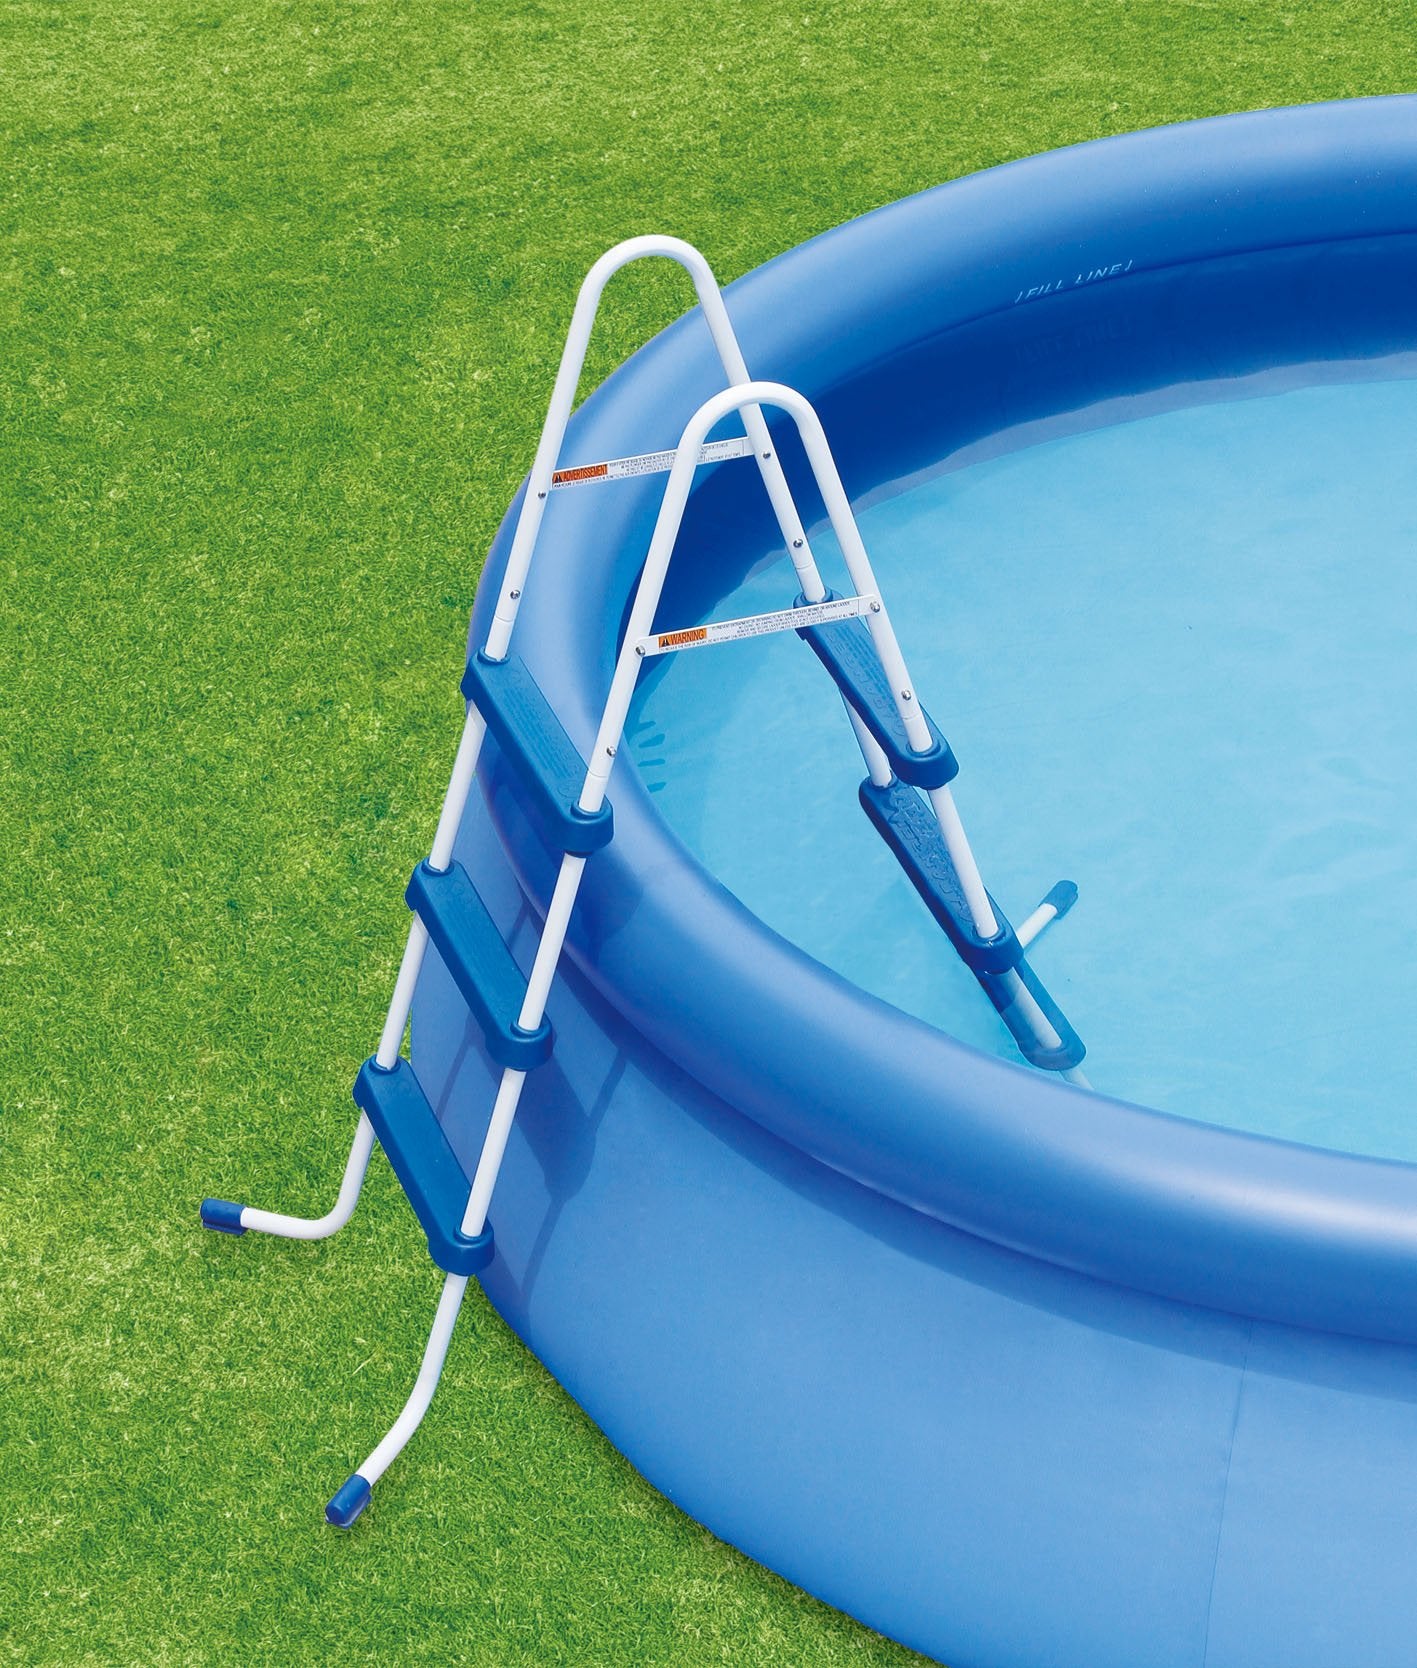 Summer Waves 15'x42" Quick Set Ring Pool with RX1000 Filter Pump system 15 Foot